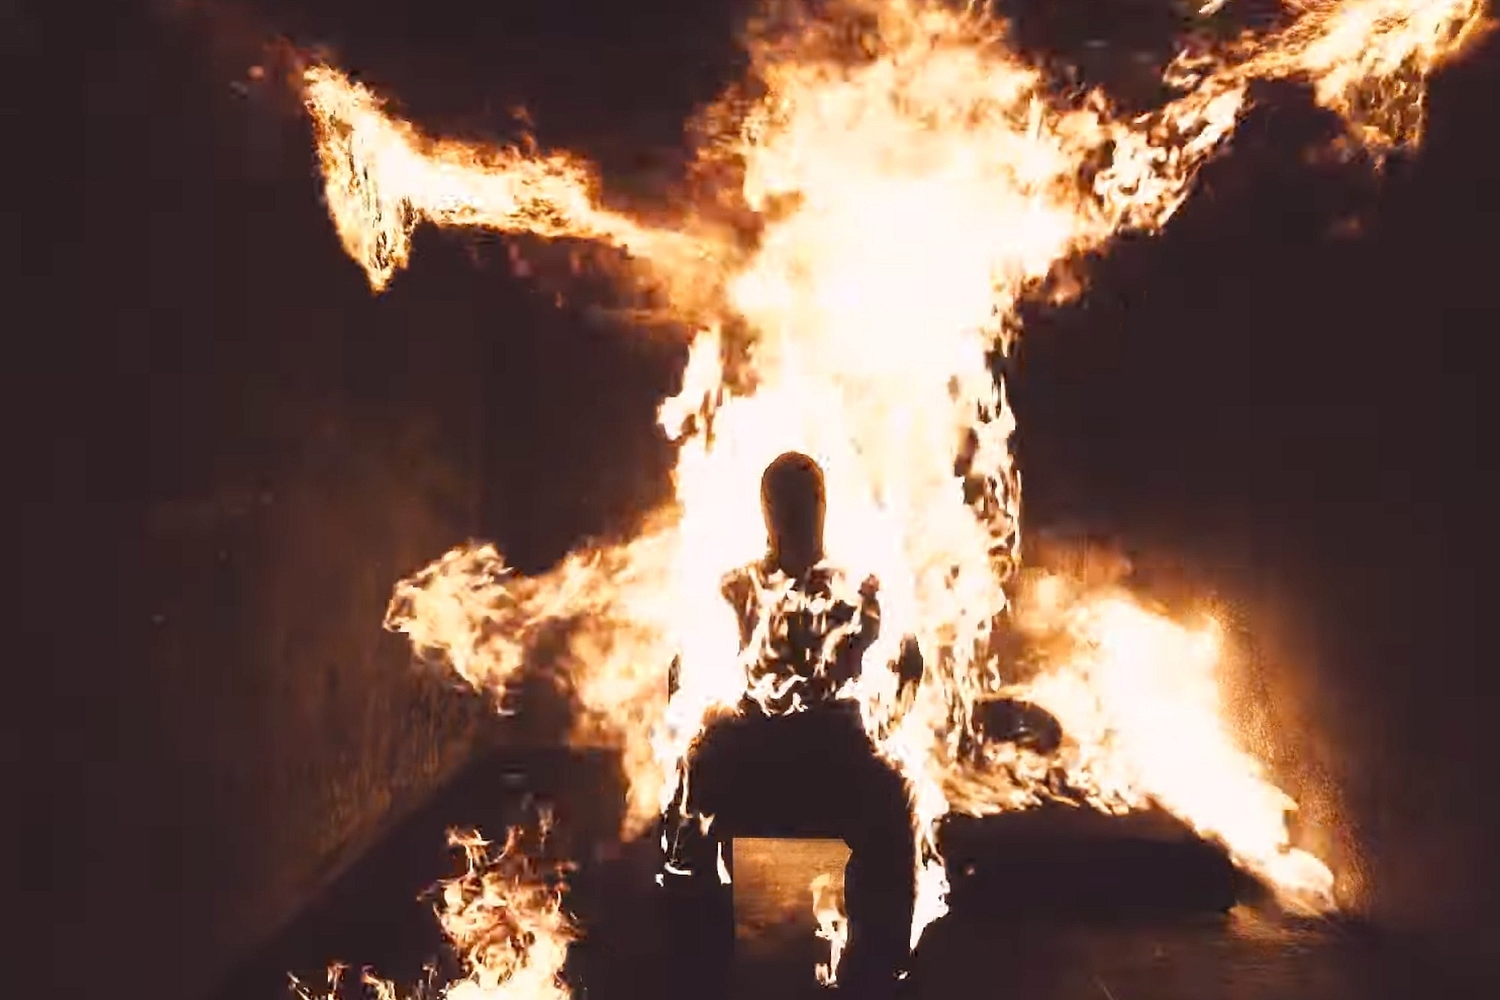 Kanye West sets himself on fire in new ‘Come To Life’ video